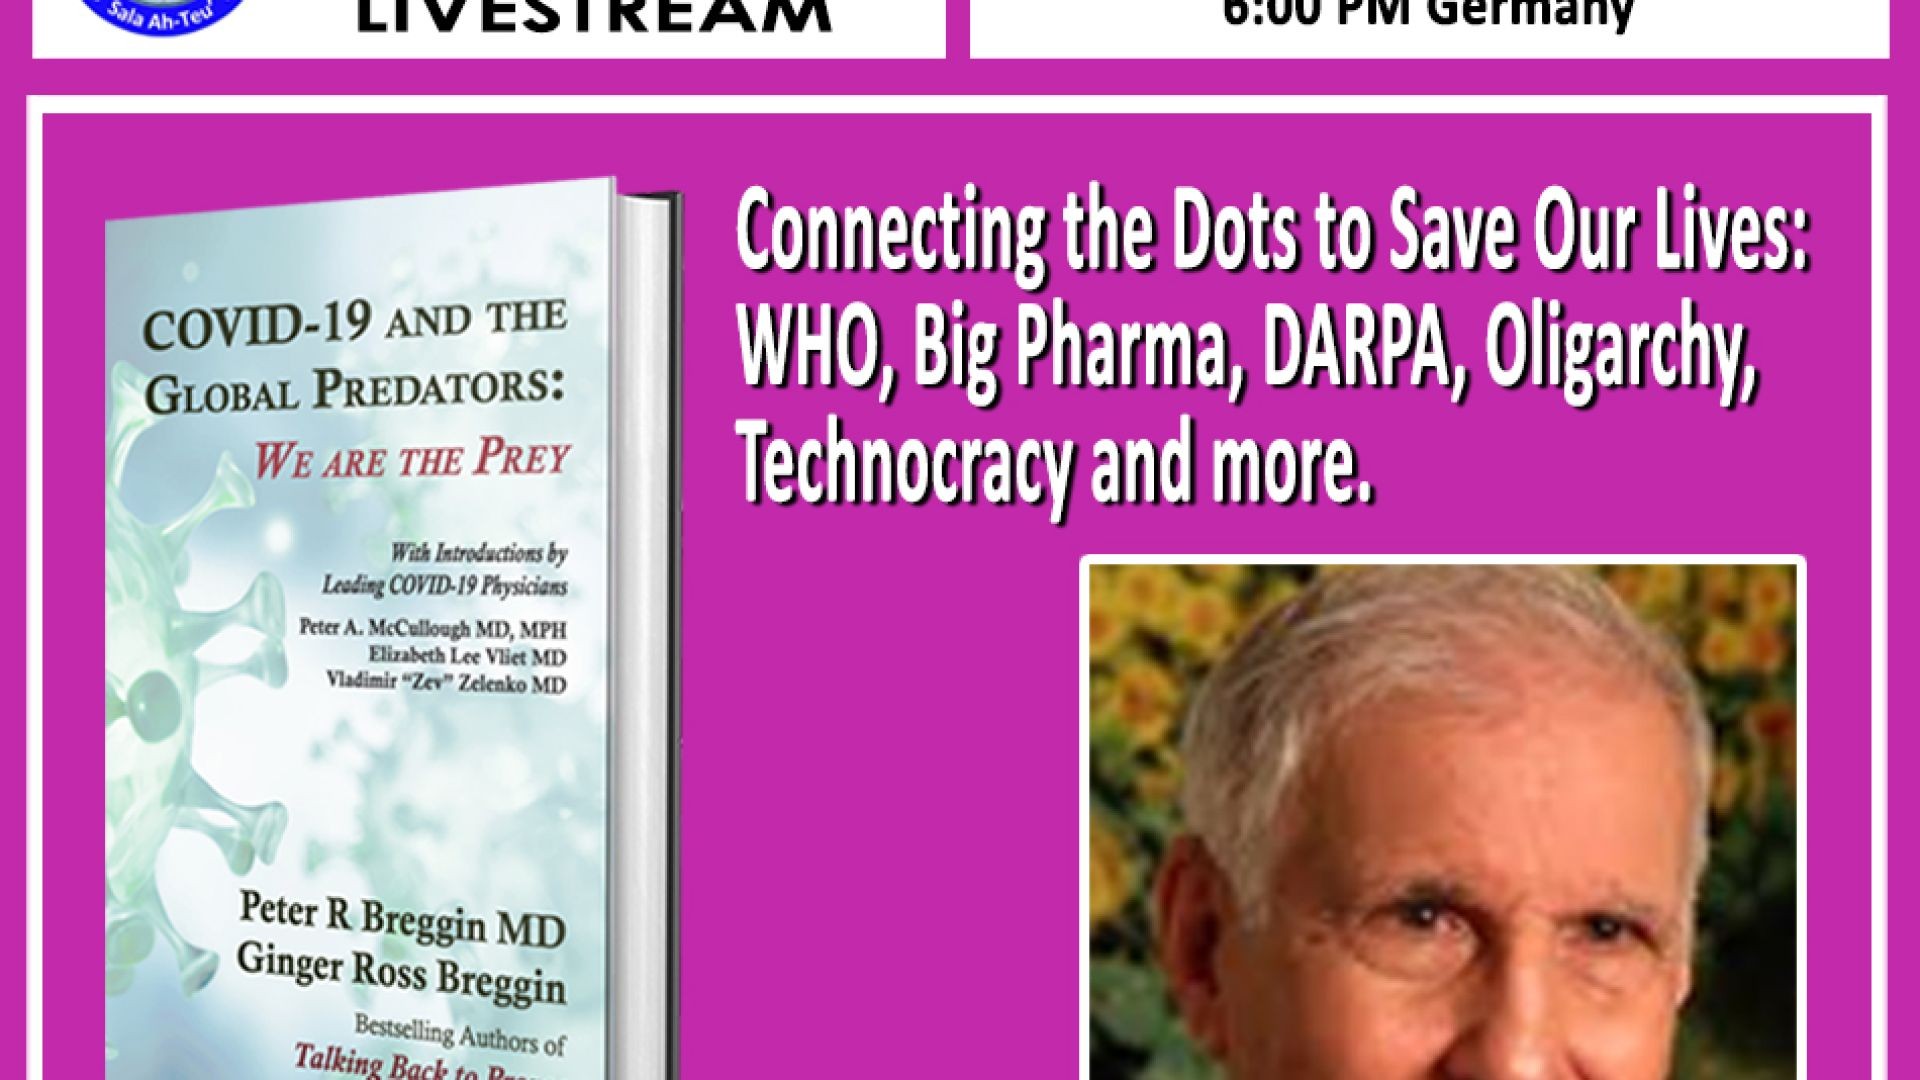 Fa Dr. Peter Breggin  - "Connecting the Dots to Save Your Lives: WHO, Big Pharma, DARPA, Oligar